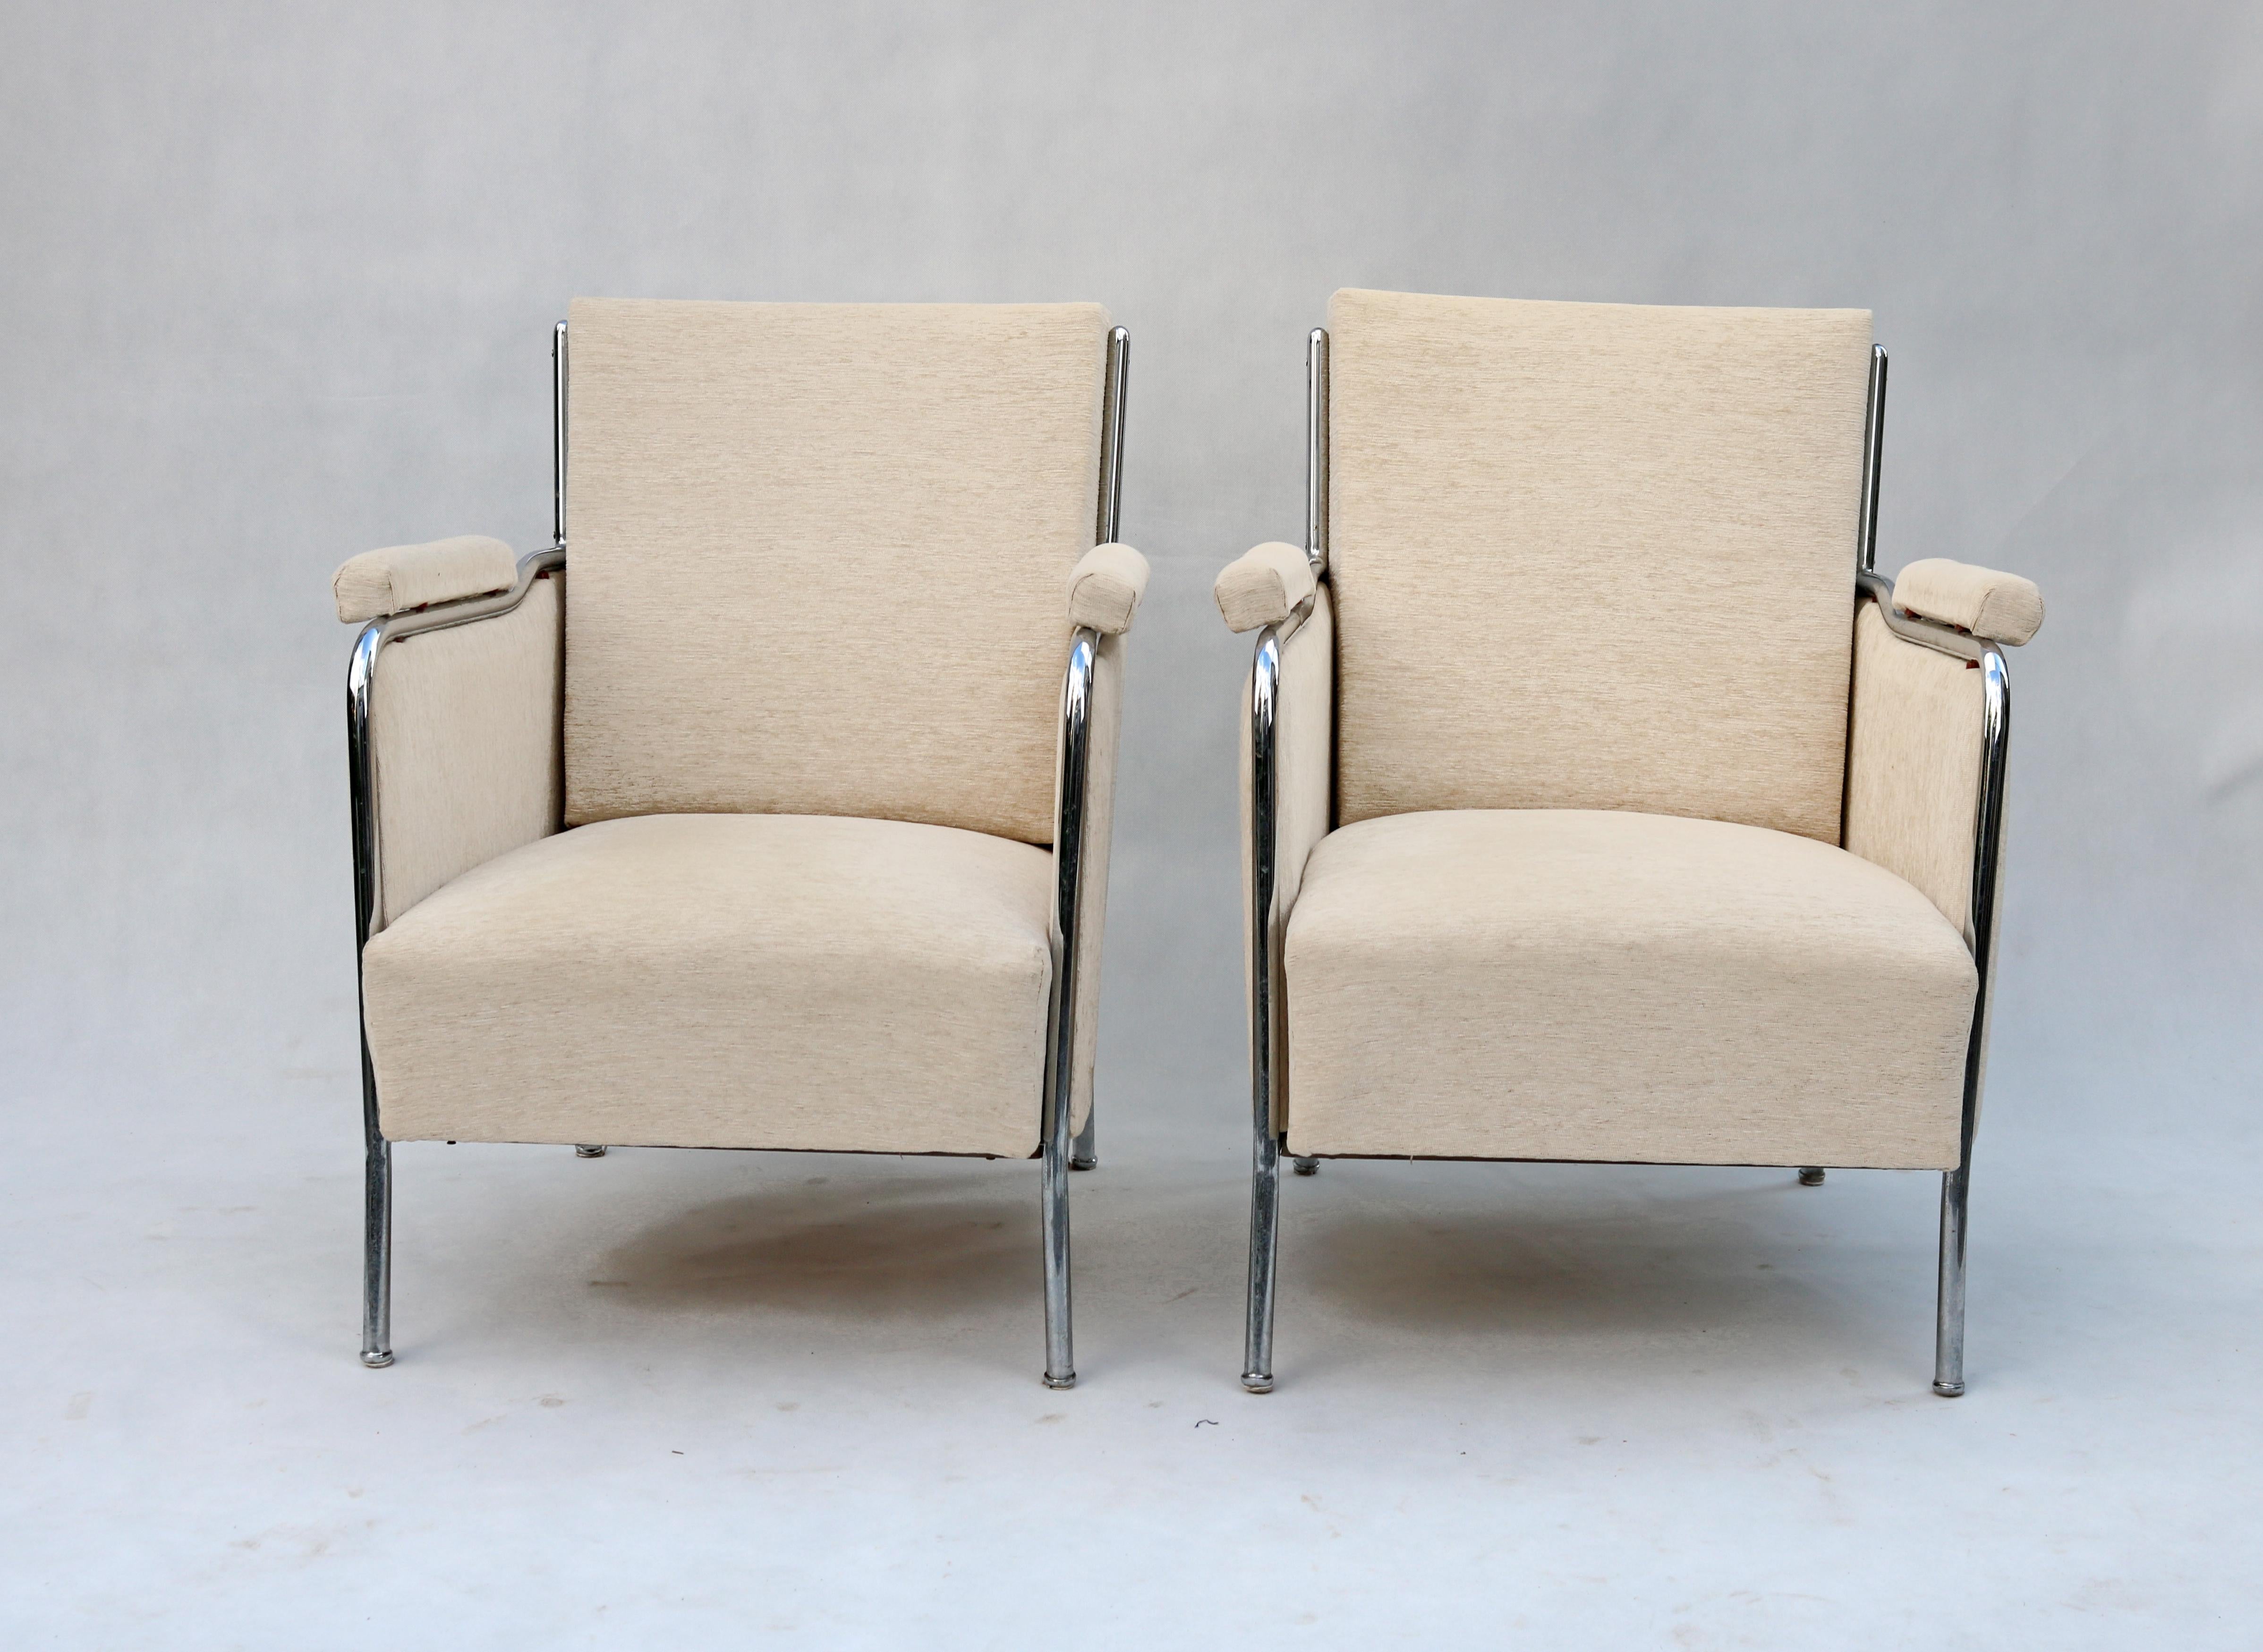 This is a unique set of two armchairs and a table, which were manufactured for the 1958 Brussels World's Fair. They were designed by Hungarian designer Joszef Peresztegi. They are a beautiful example of functionalist design with their chrome accents